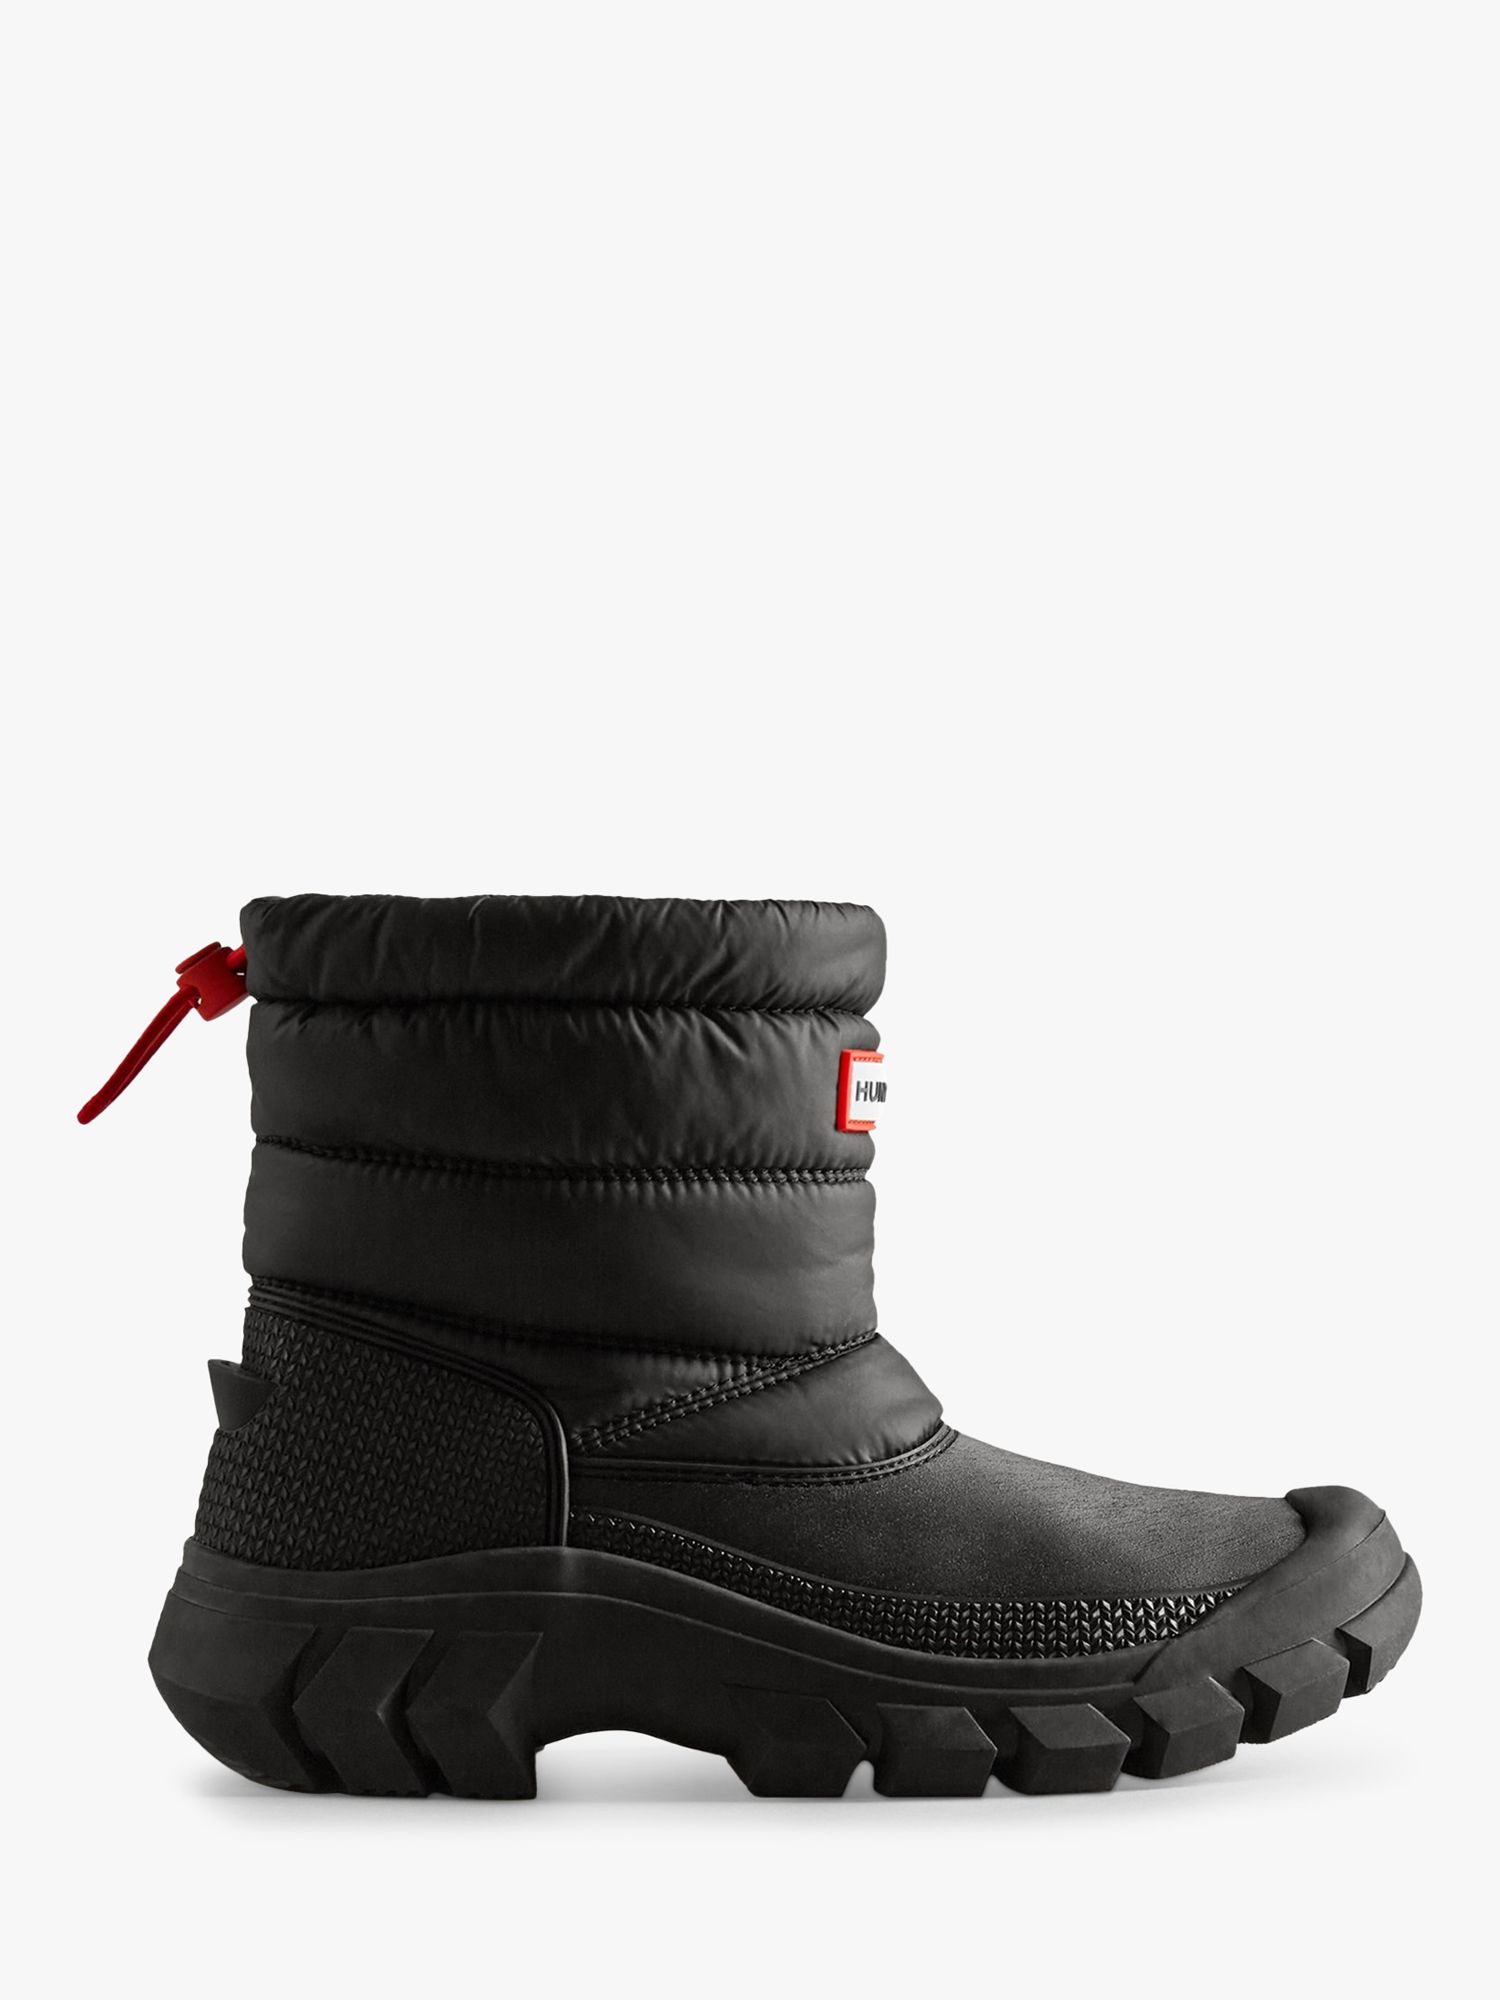 Hunter Intrepid Quilted Snow Boots at John Lewis & Partners